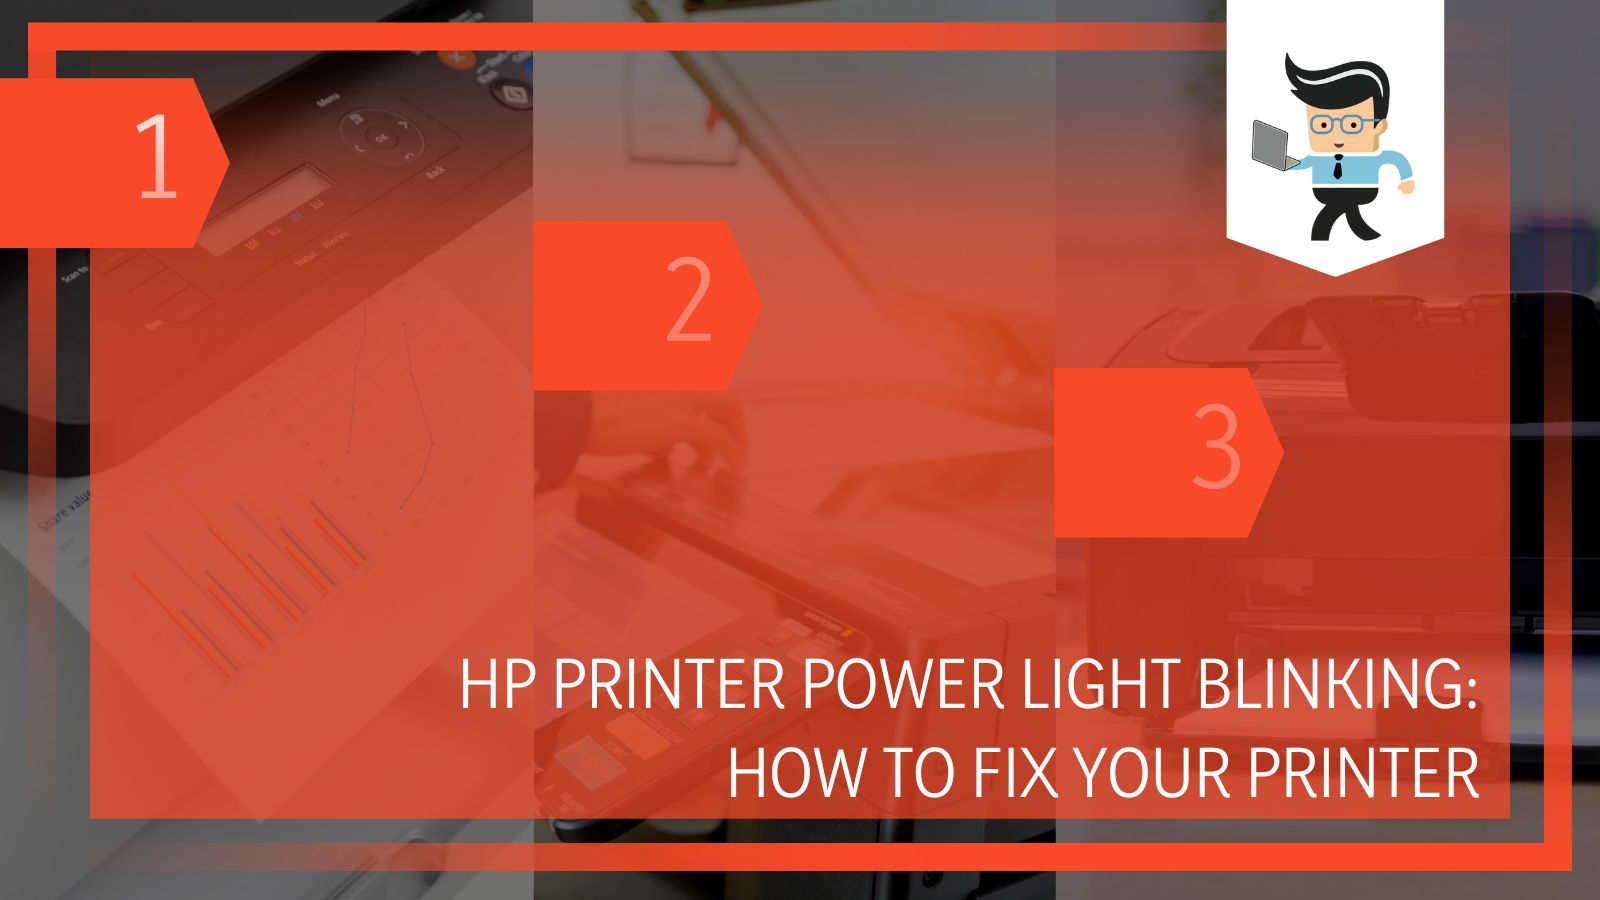 Reasons and Solutions for Blinking Printer Power Button